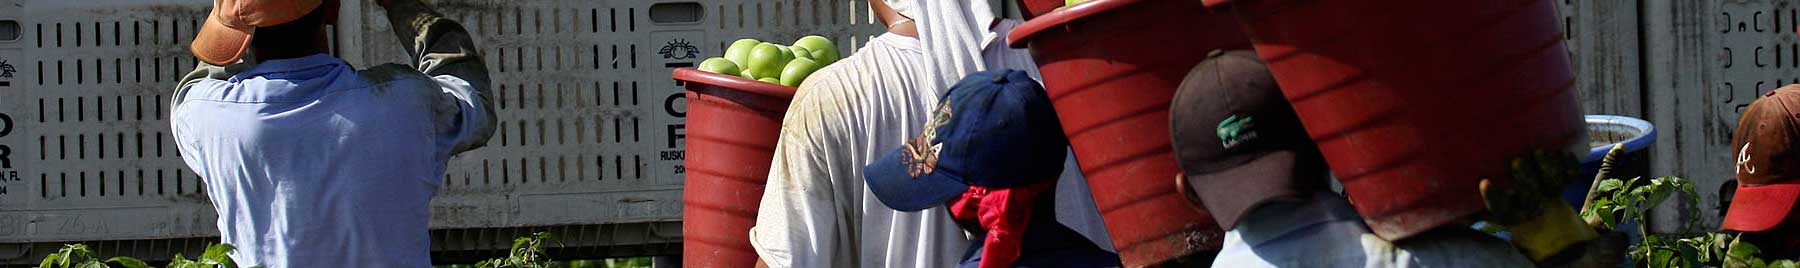 Farm workers loading green apples on a truck